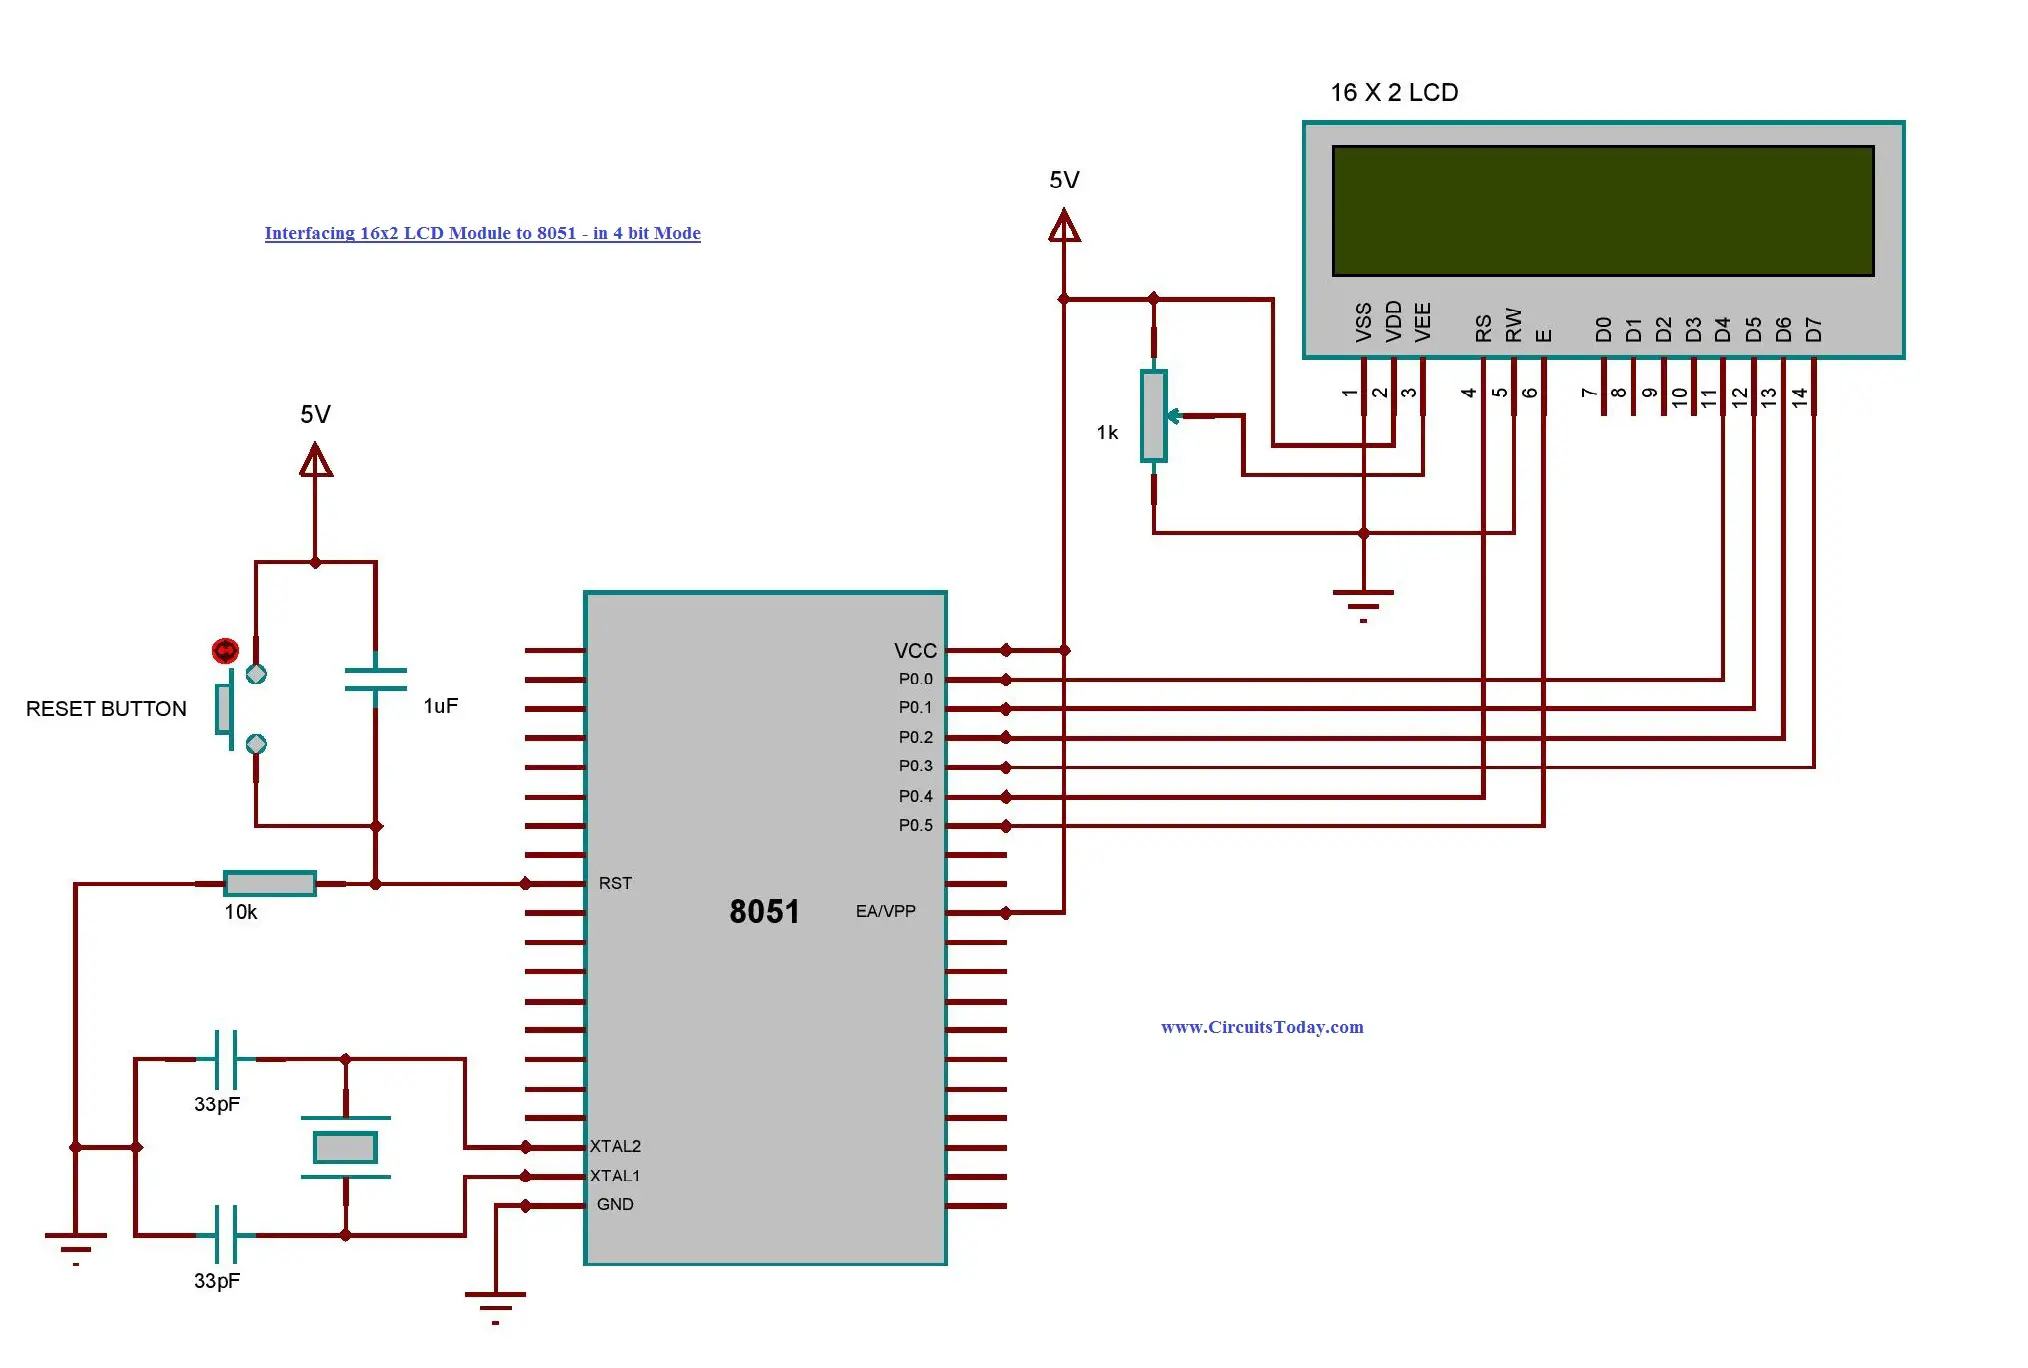 How To Interface 16x2 Lcd With 8051 Microcontroller